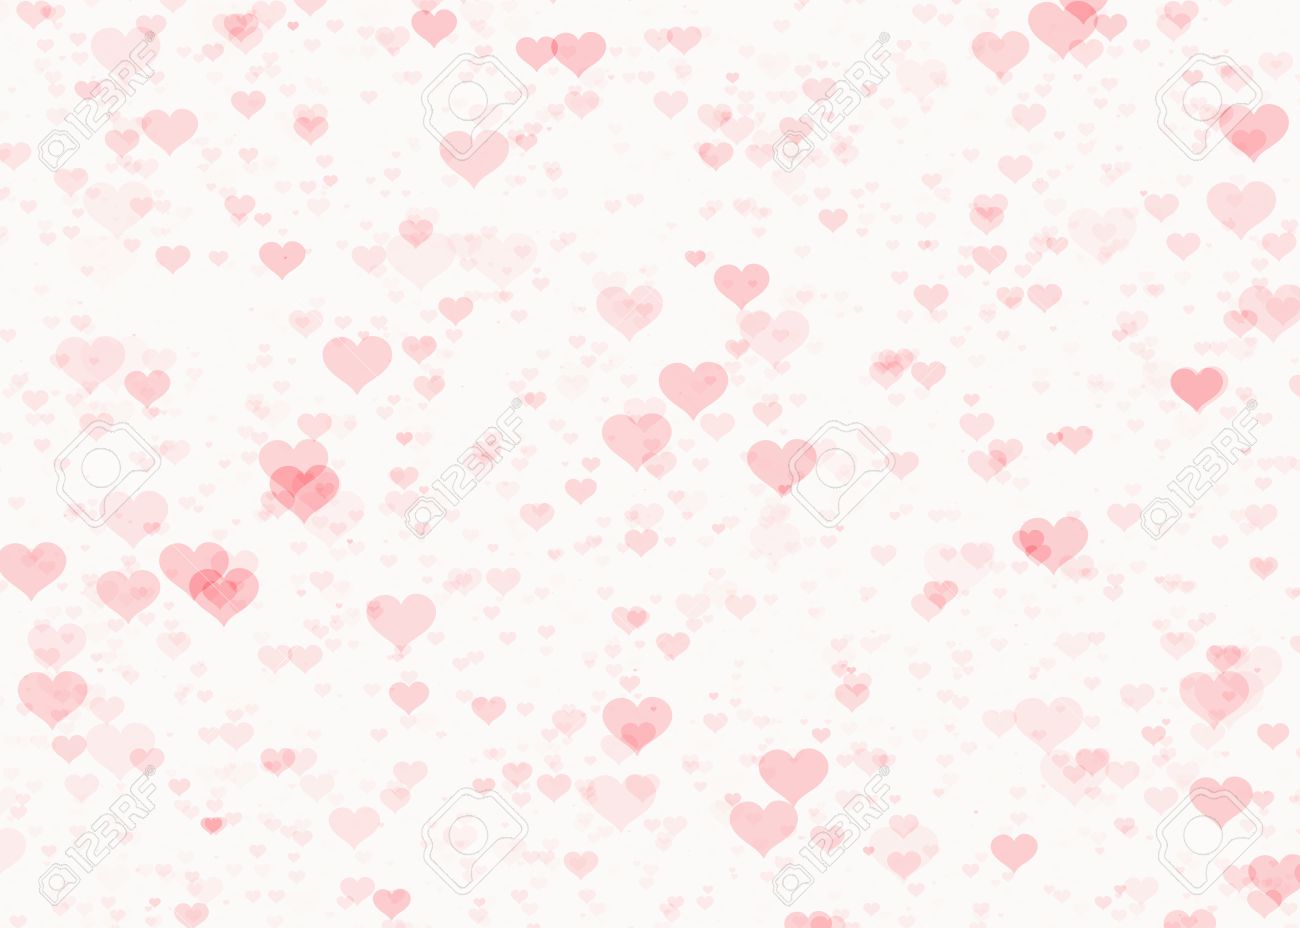 Red Hearts Watermark Background Love Texture Stock Photo